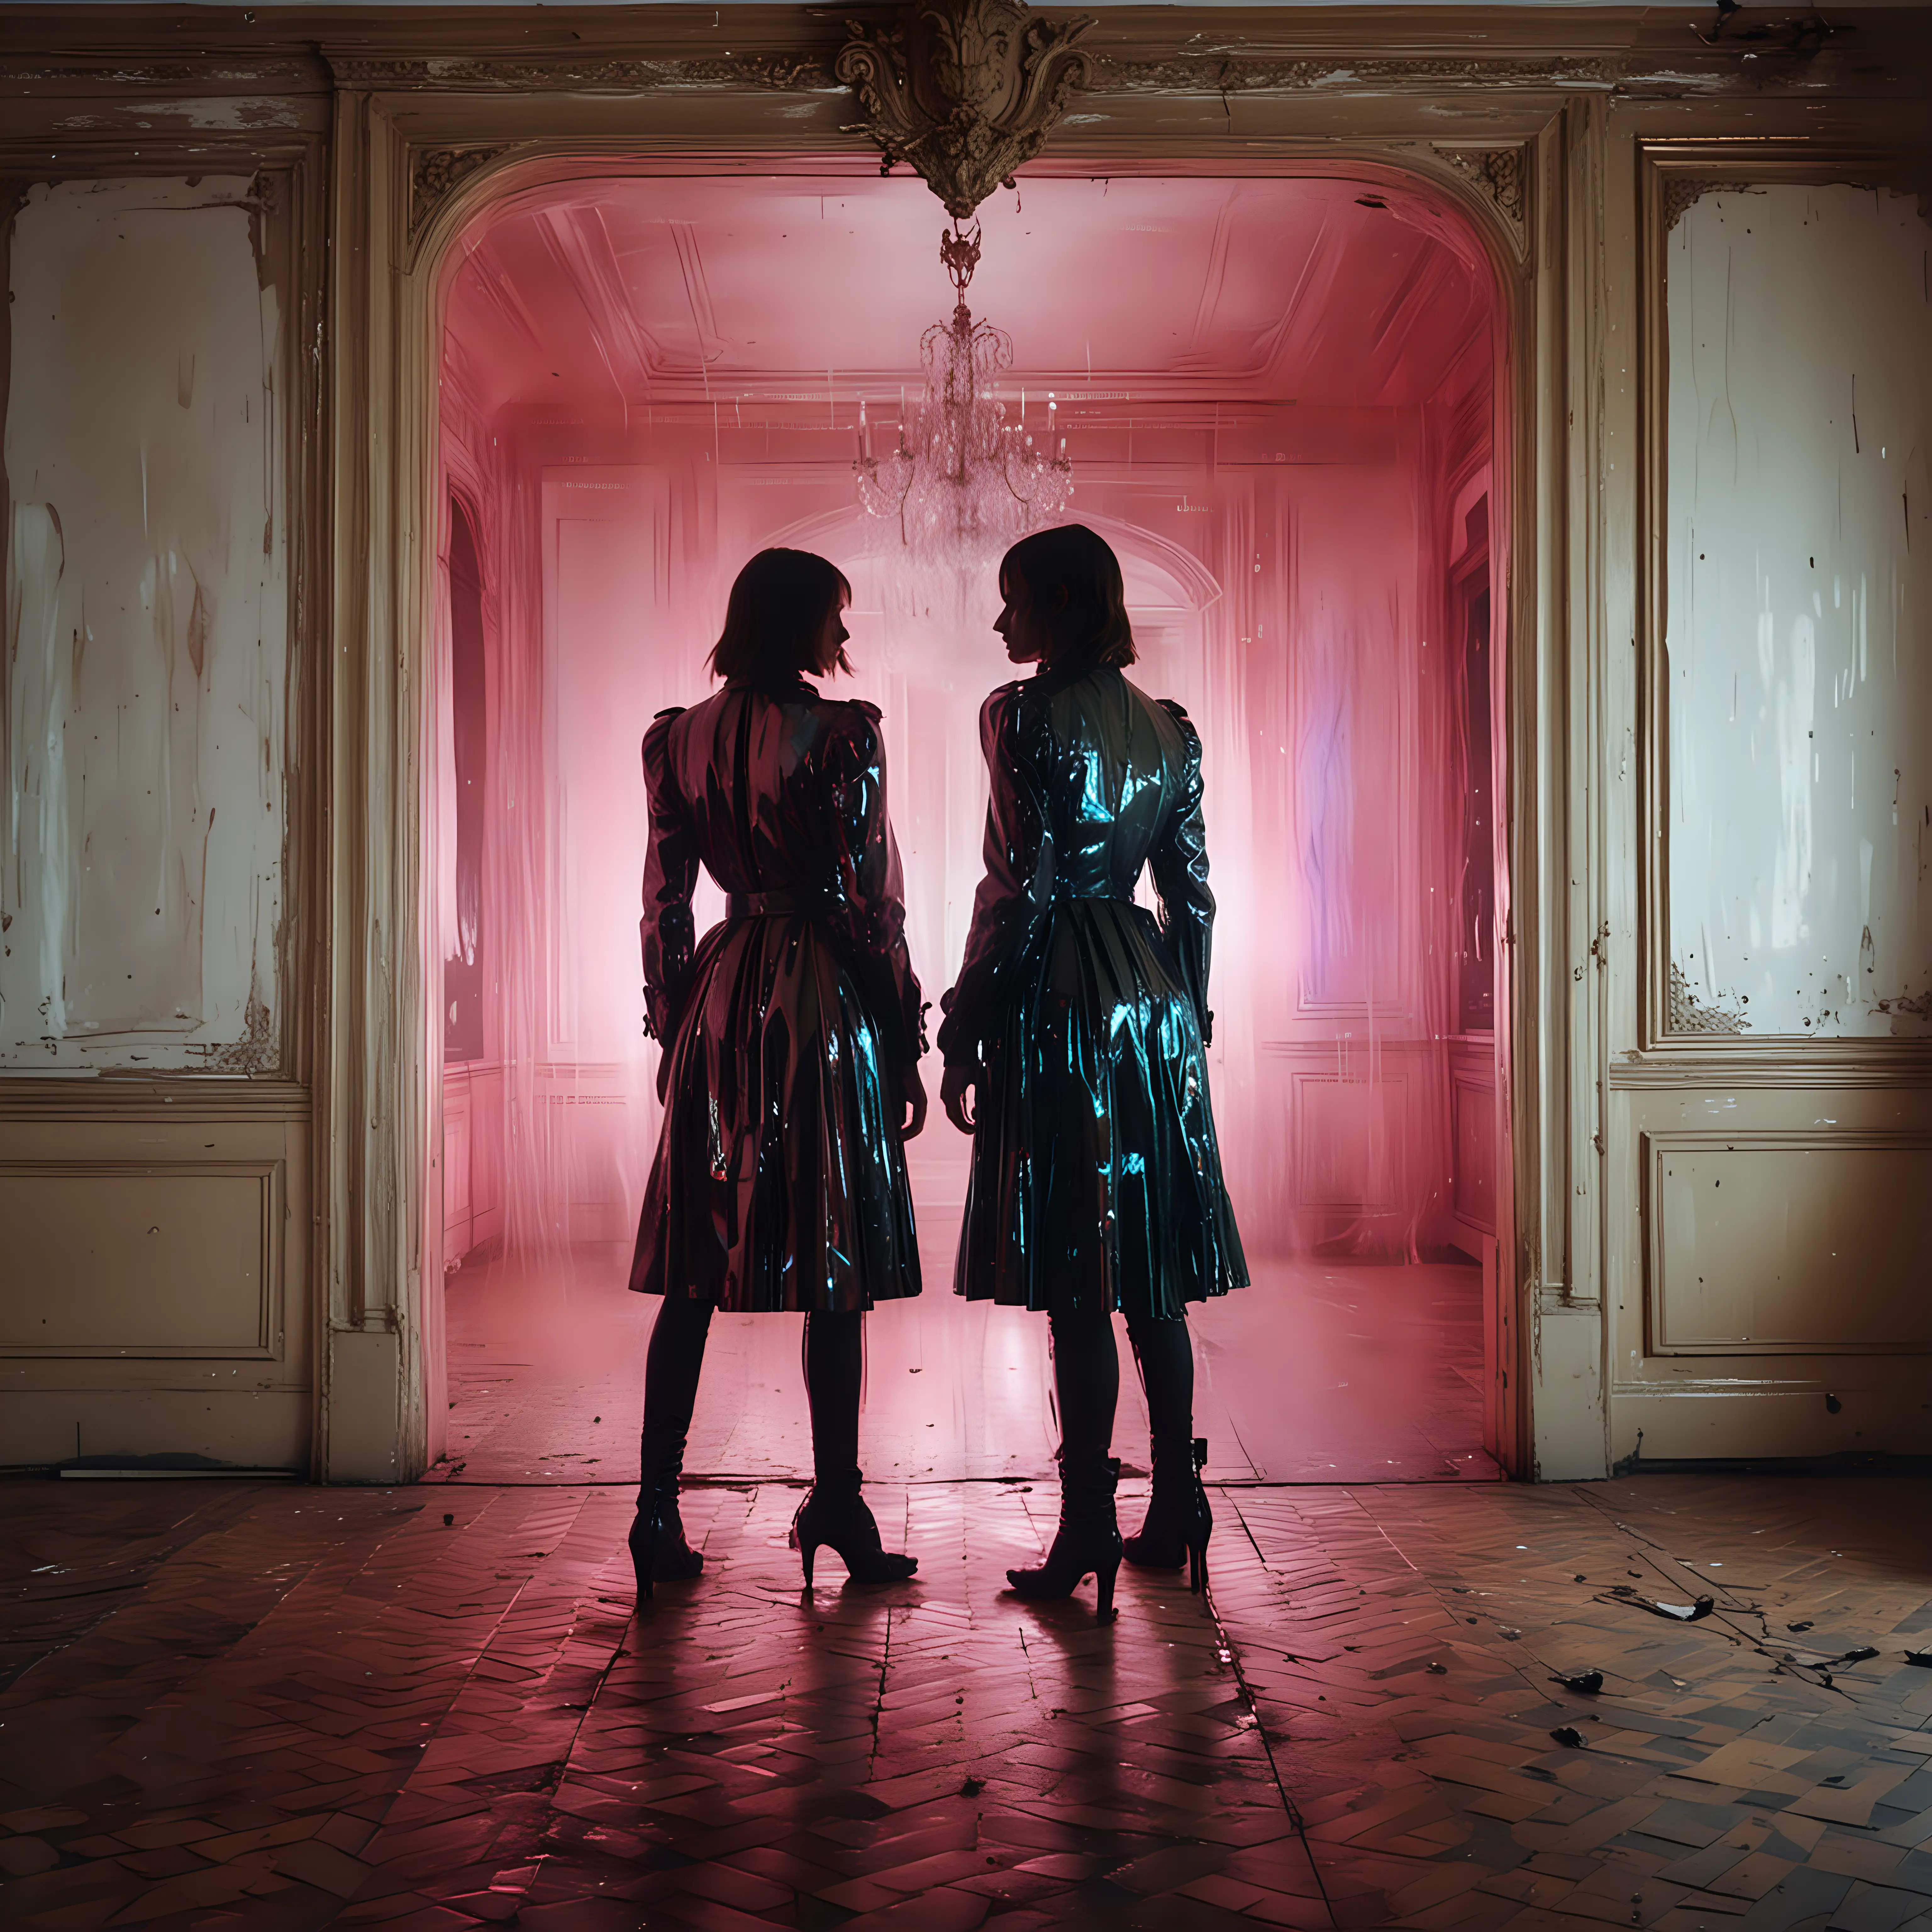 Abstract-Neon-Shapes-in-18th-Century-Parisian-House-with-Kraftwerk-and-Tame-Impala-Couple-in-Alexander-McQueen-Attire